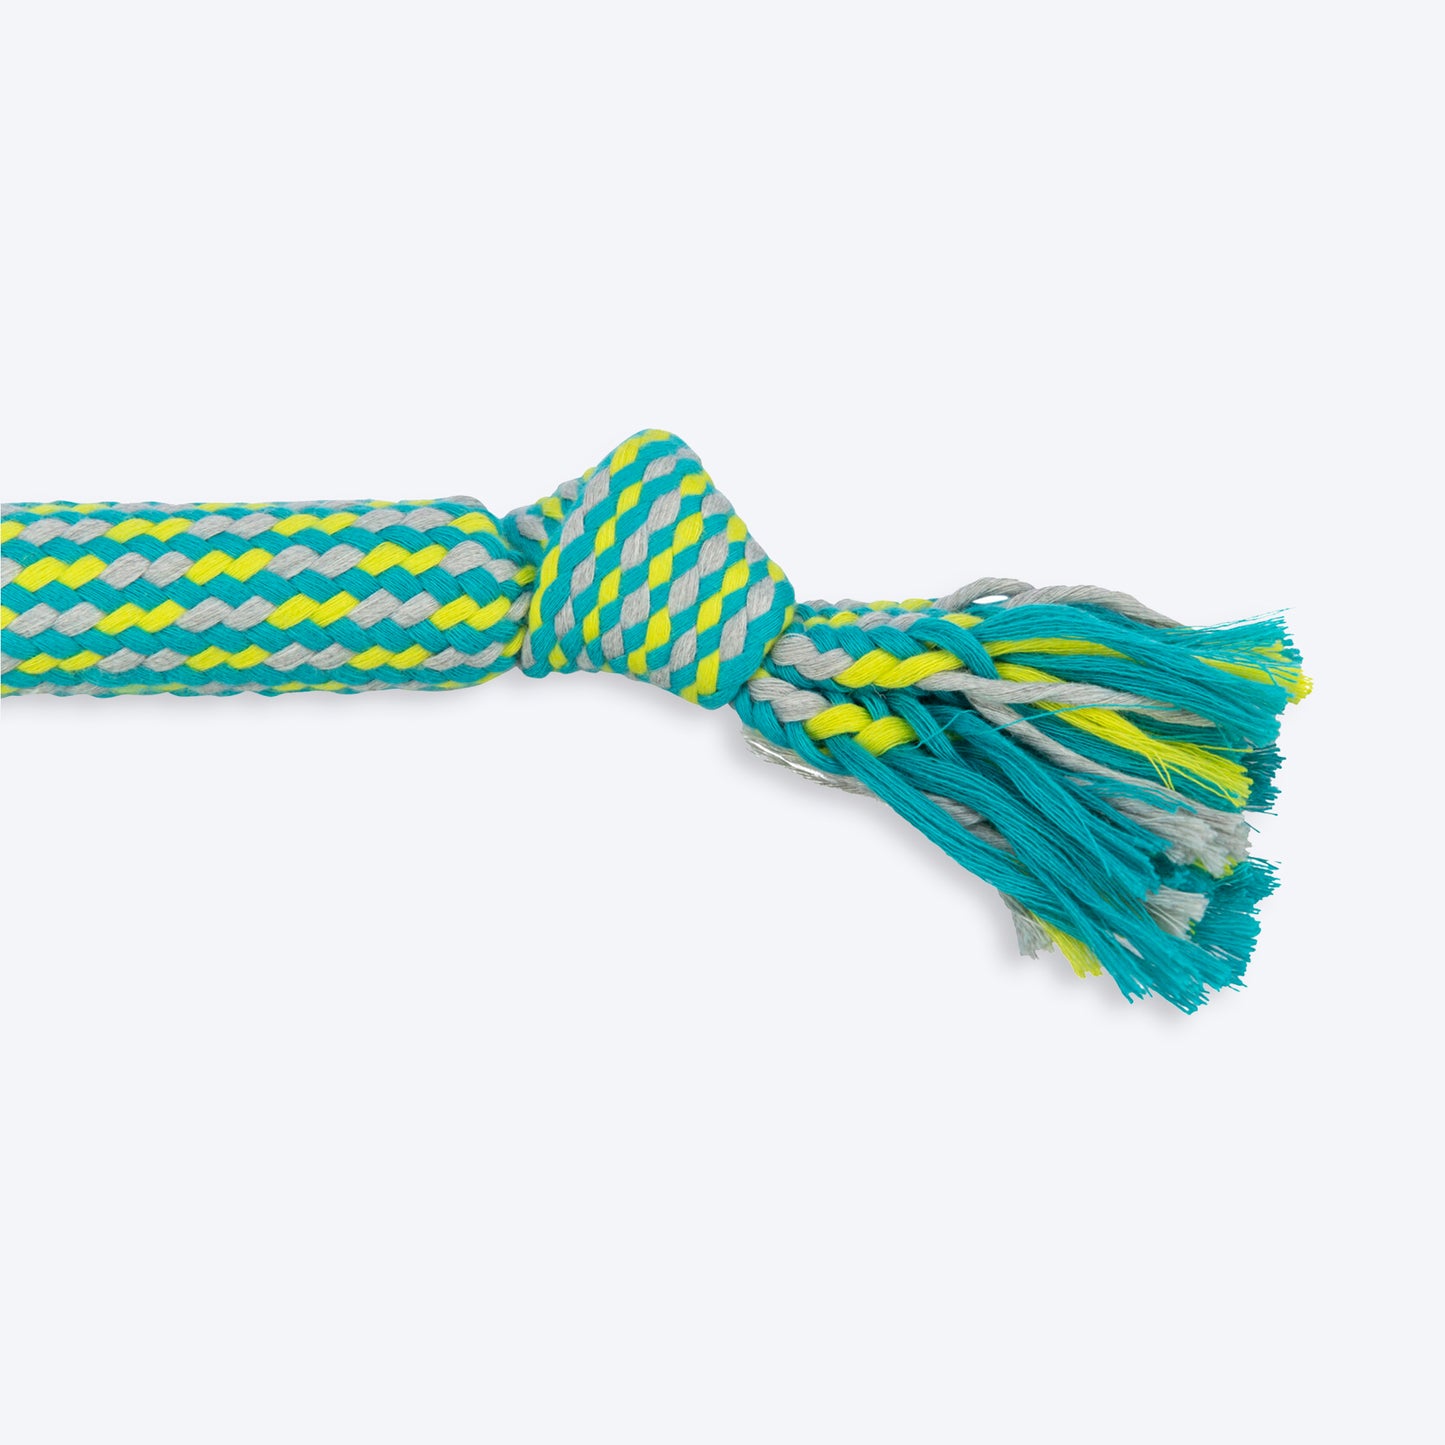 Trixie Playing Rope With Sound Dog Toy - Blue - 48 cm - Heads Up For Tails